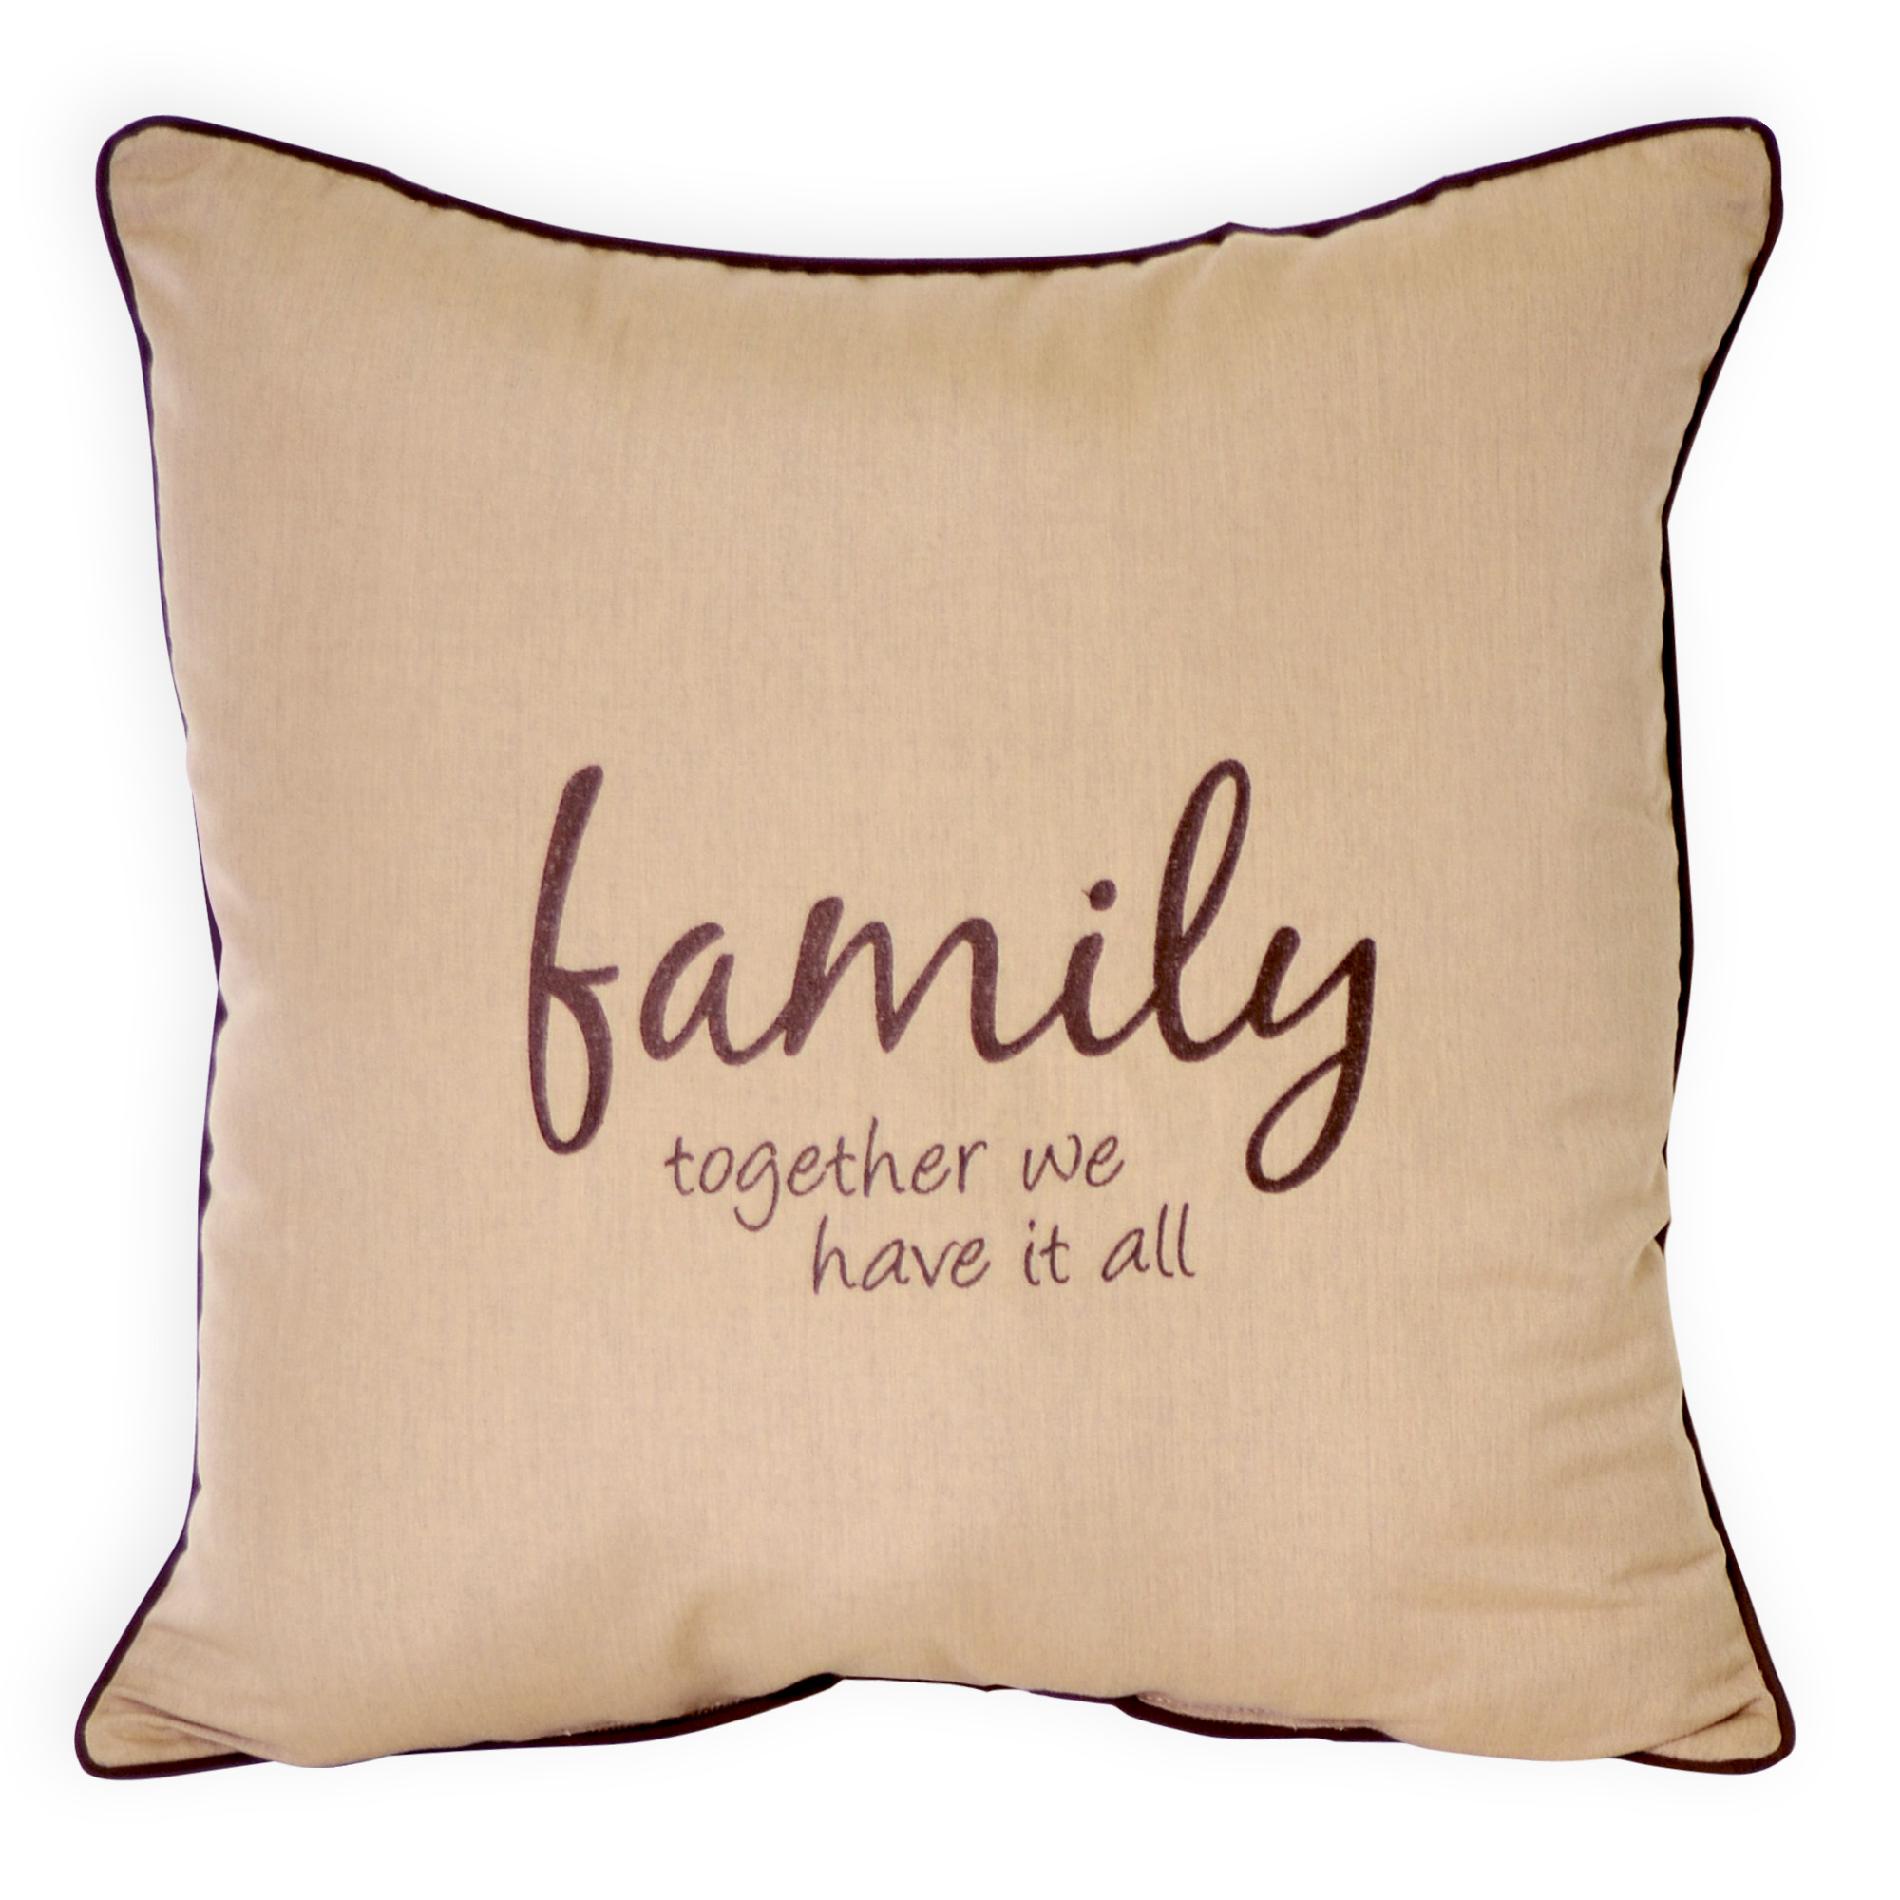 Deluxe (24") Embroidered Billboard Pillow - "Family, together we have it all" - Color:  Canvas Heather Beige